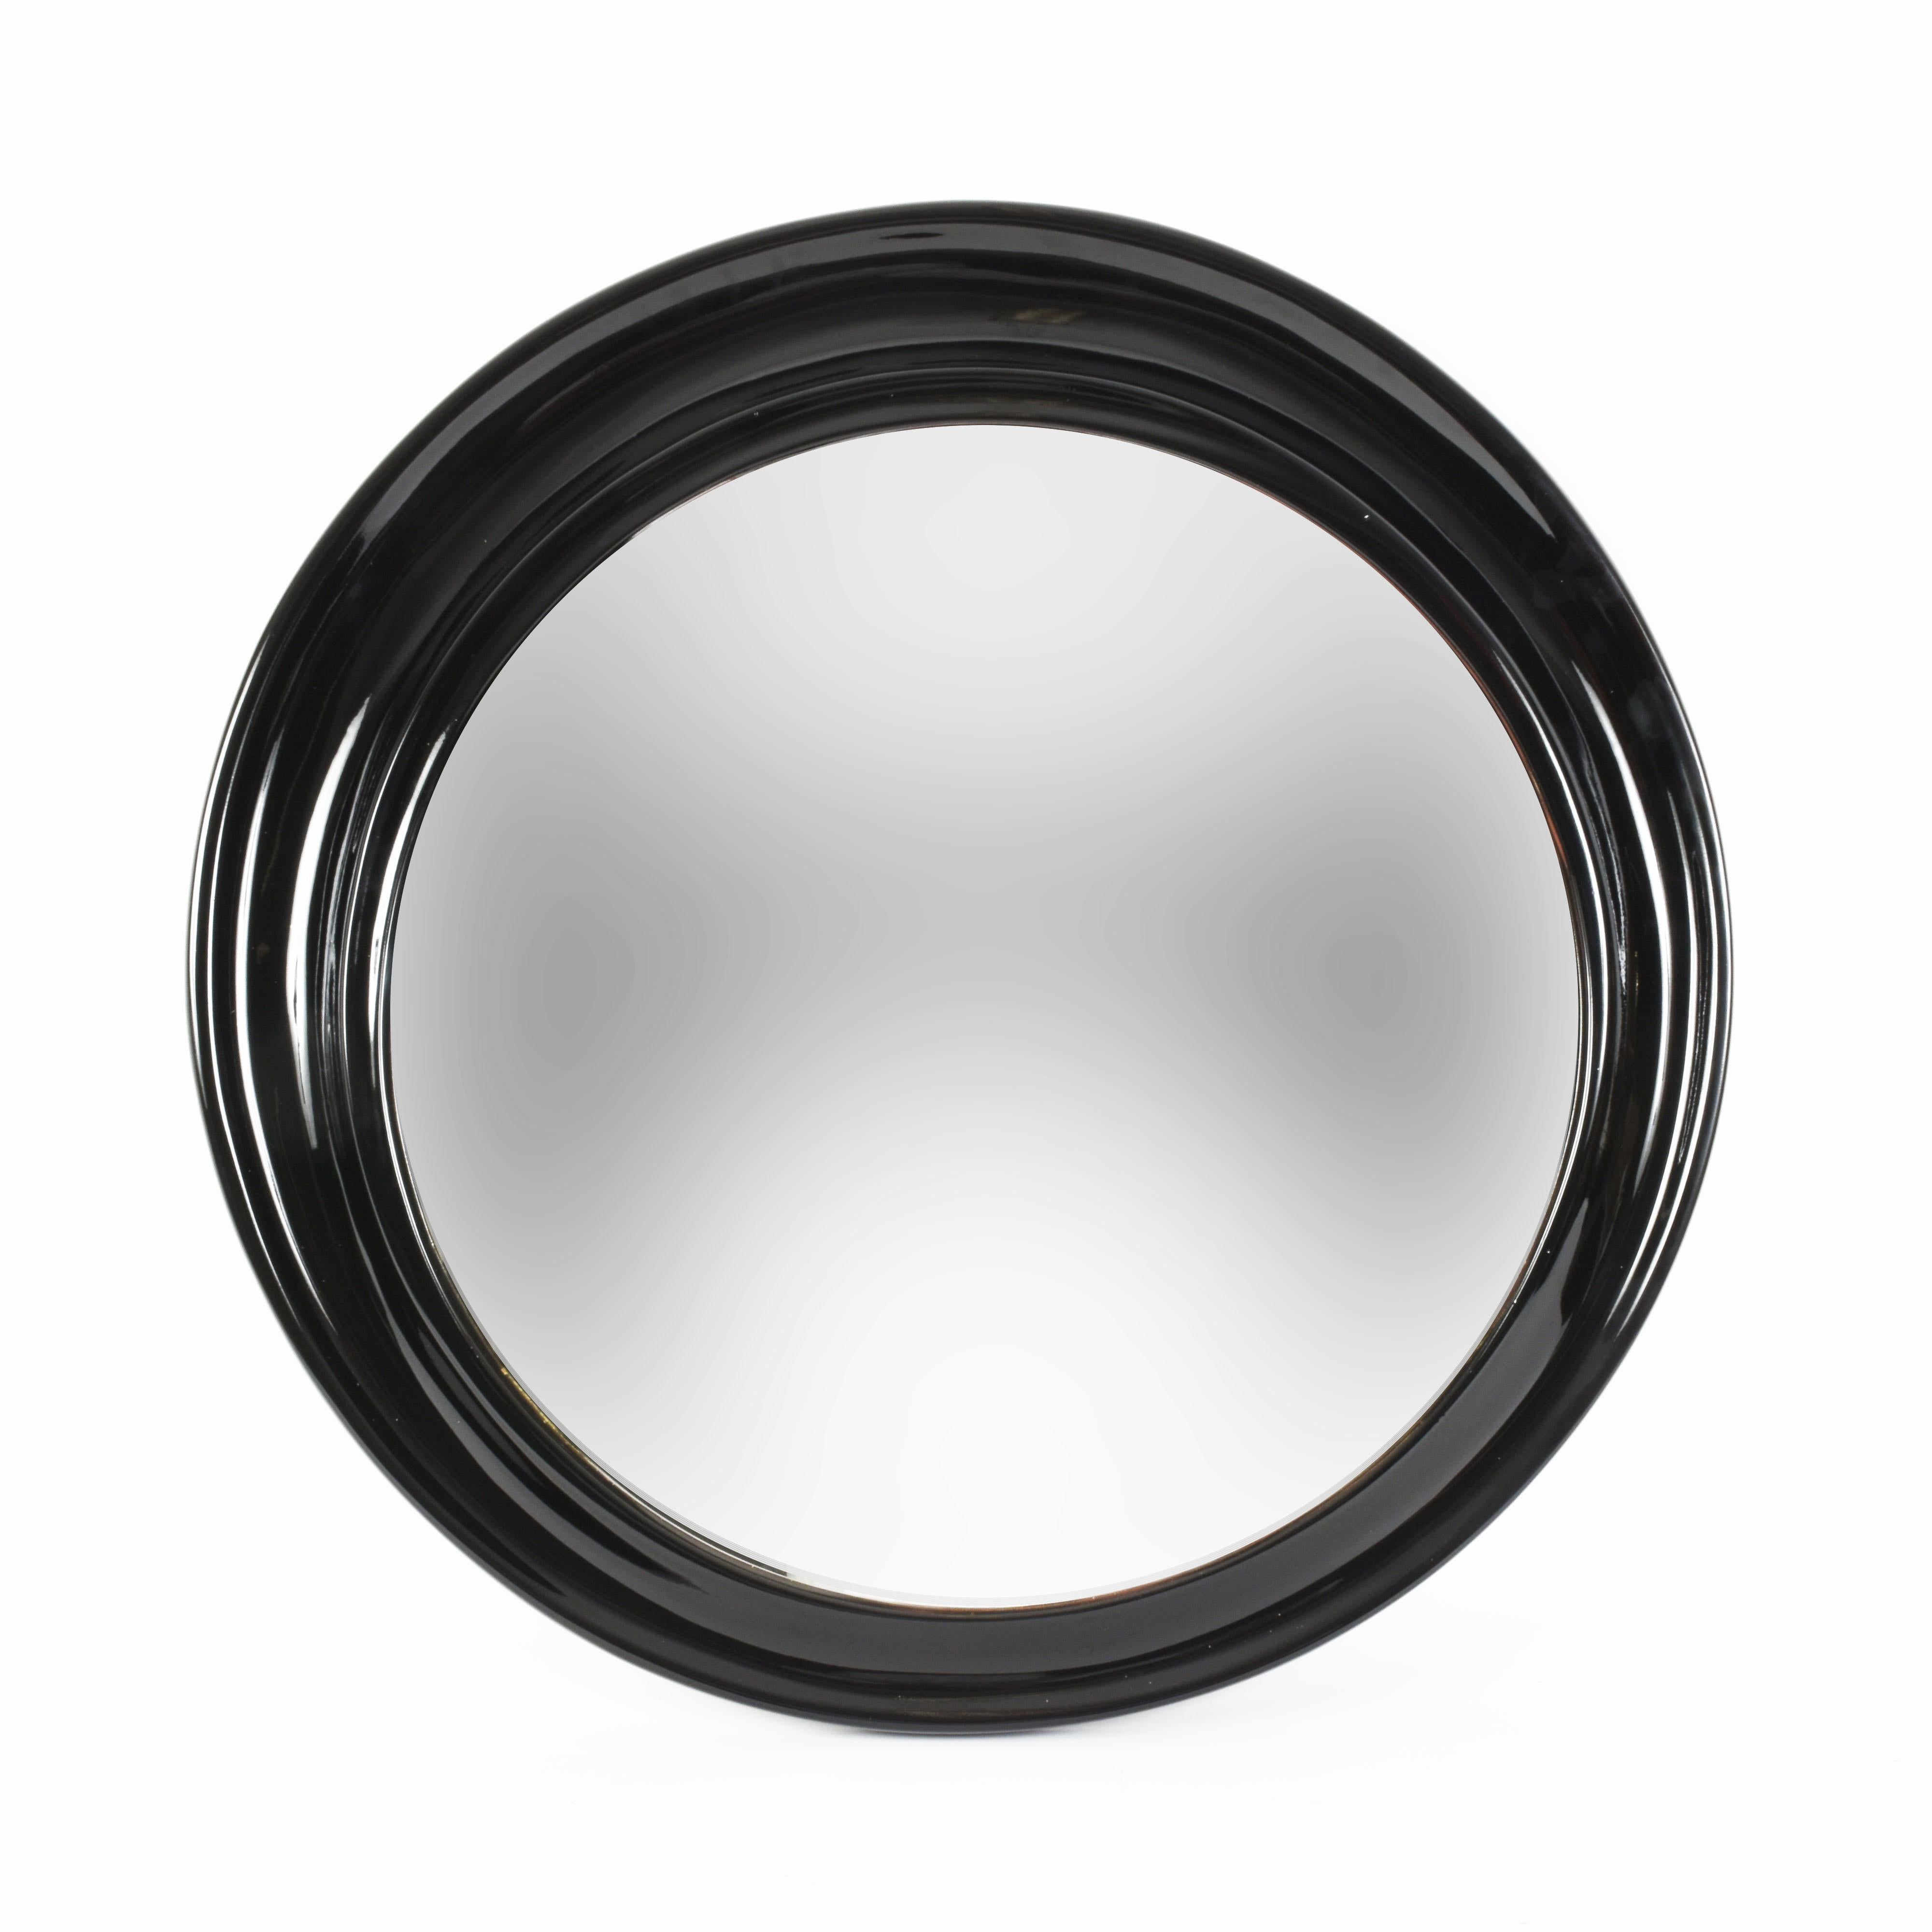 Amazing round mirror with black lacquered resin frame. This piece was produced in Italy during 1970s.

This mirror will surprise you with its round lines and its glossy and eye-catching black lacquered resin frame.

An iconic item from the 1970s